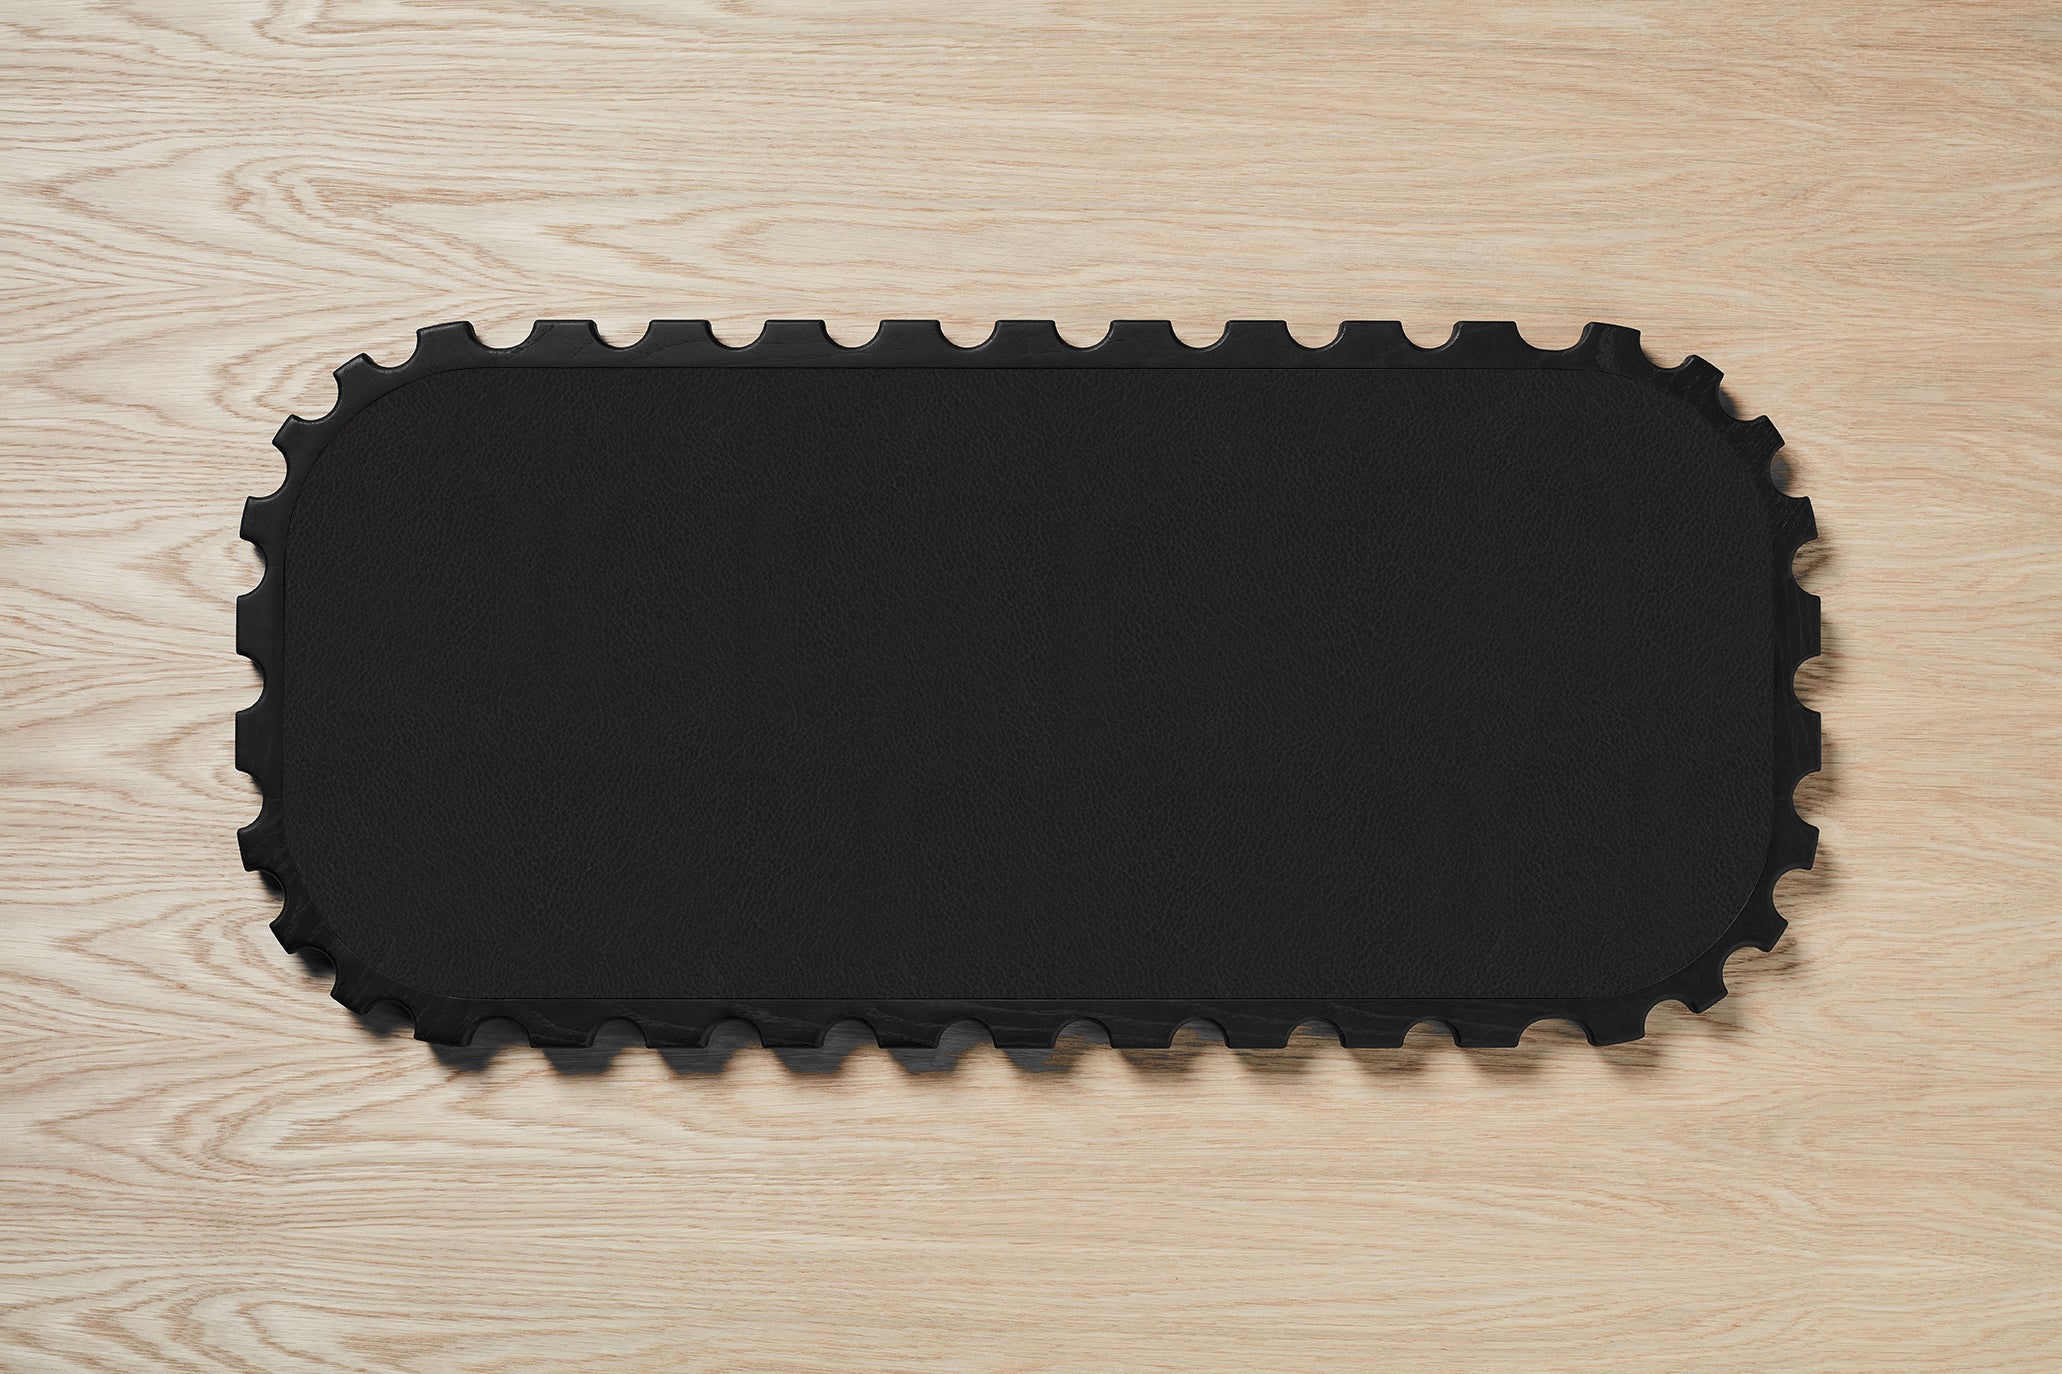 Flow Scalloped Black Faux Leather Tray - Zuster Furniture